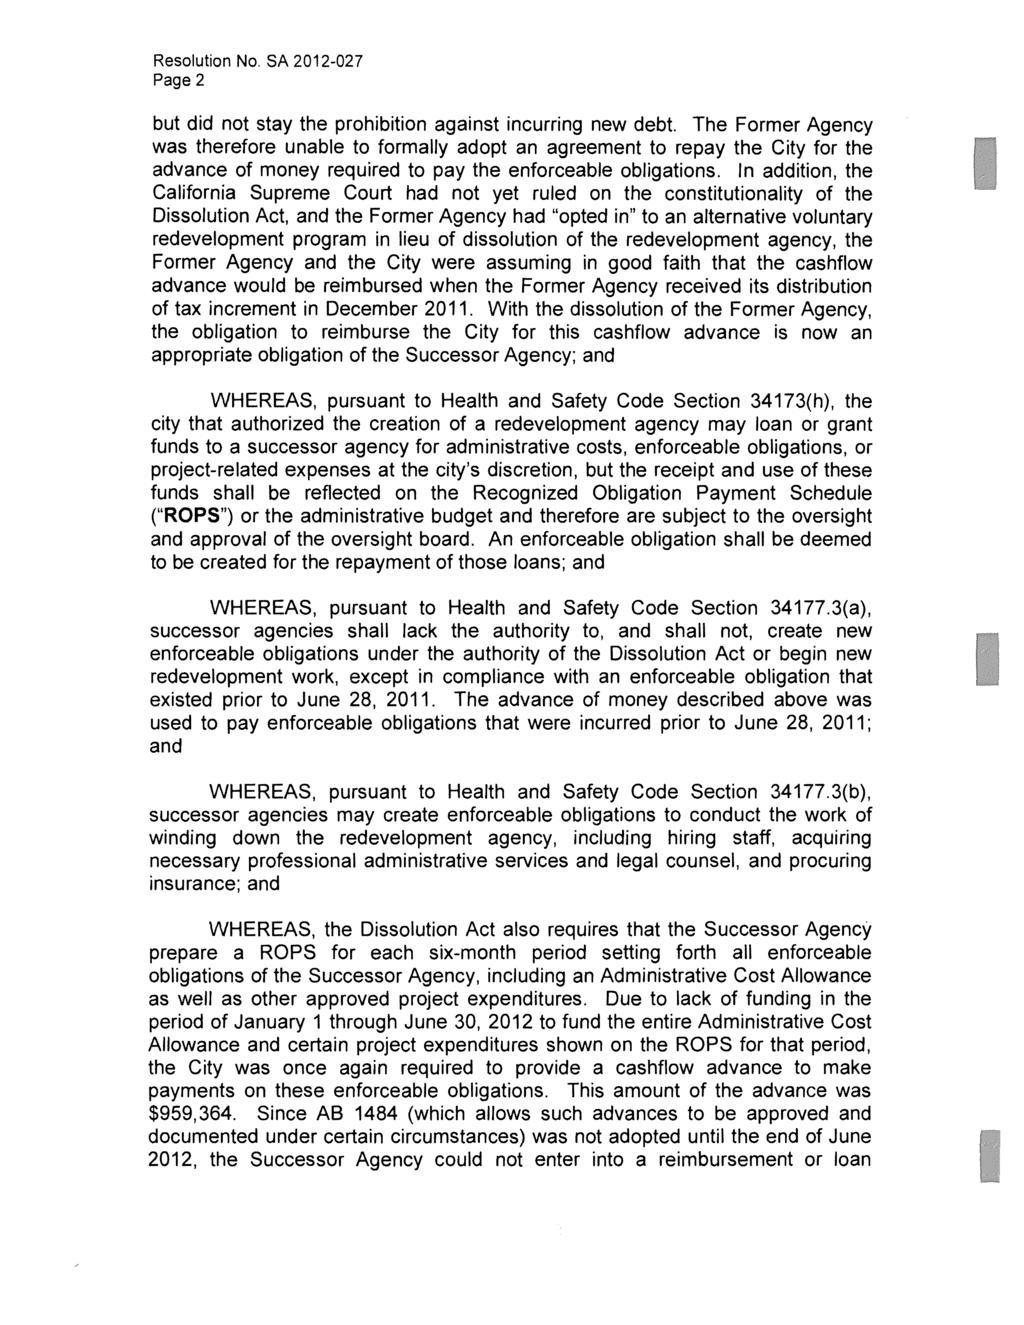 Resolution No. SA 2012-027 Page 2 but did not stay the prohibition against incurring new debt.